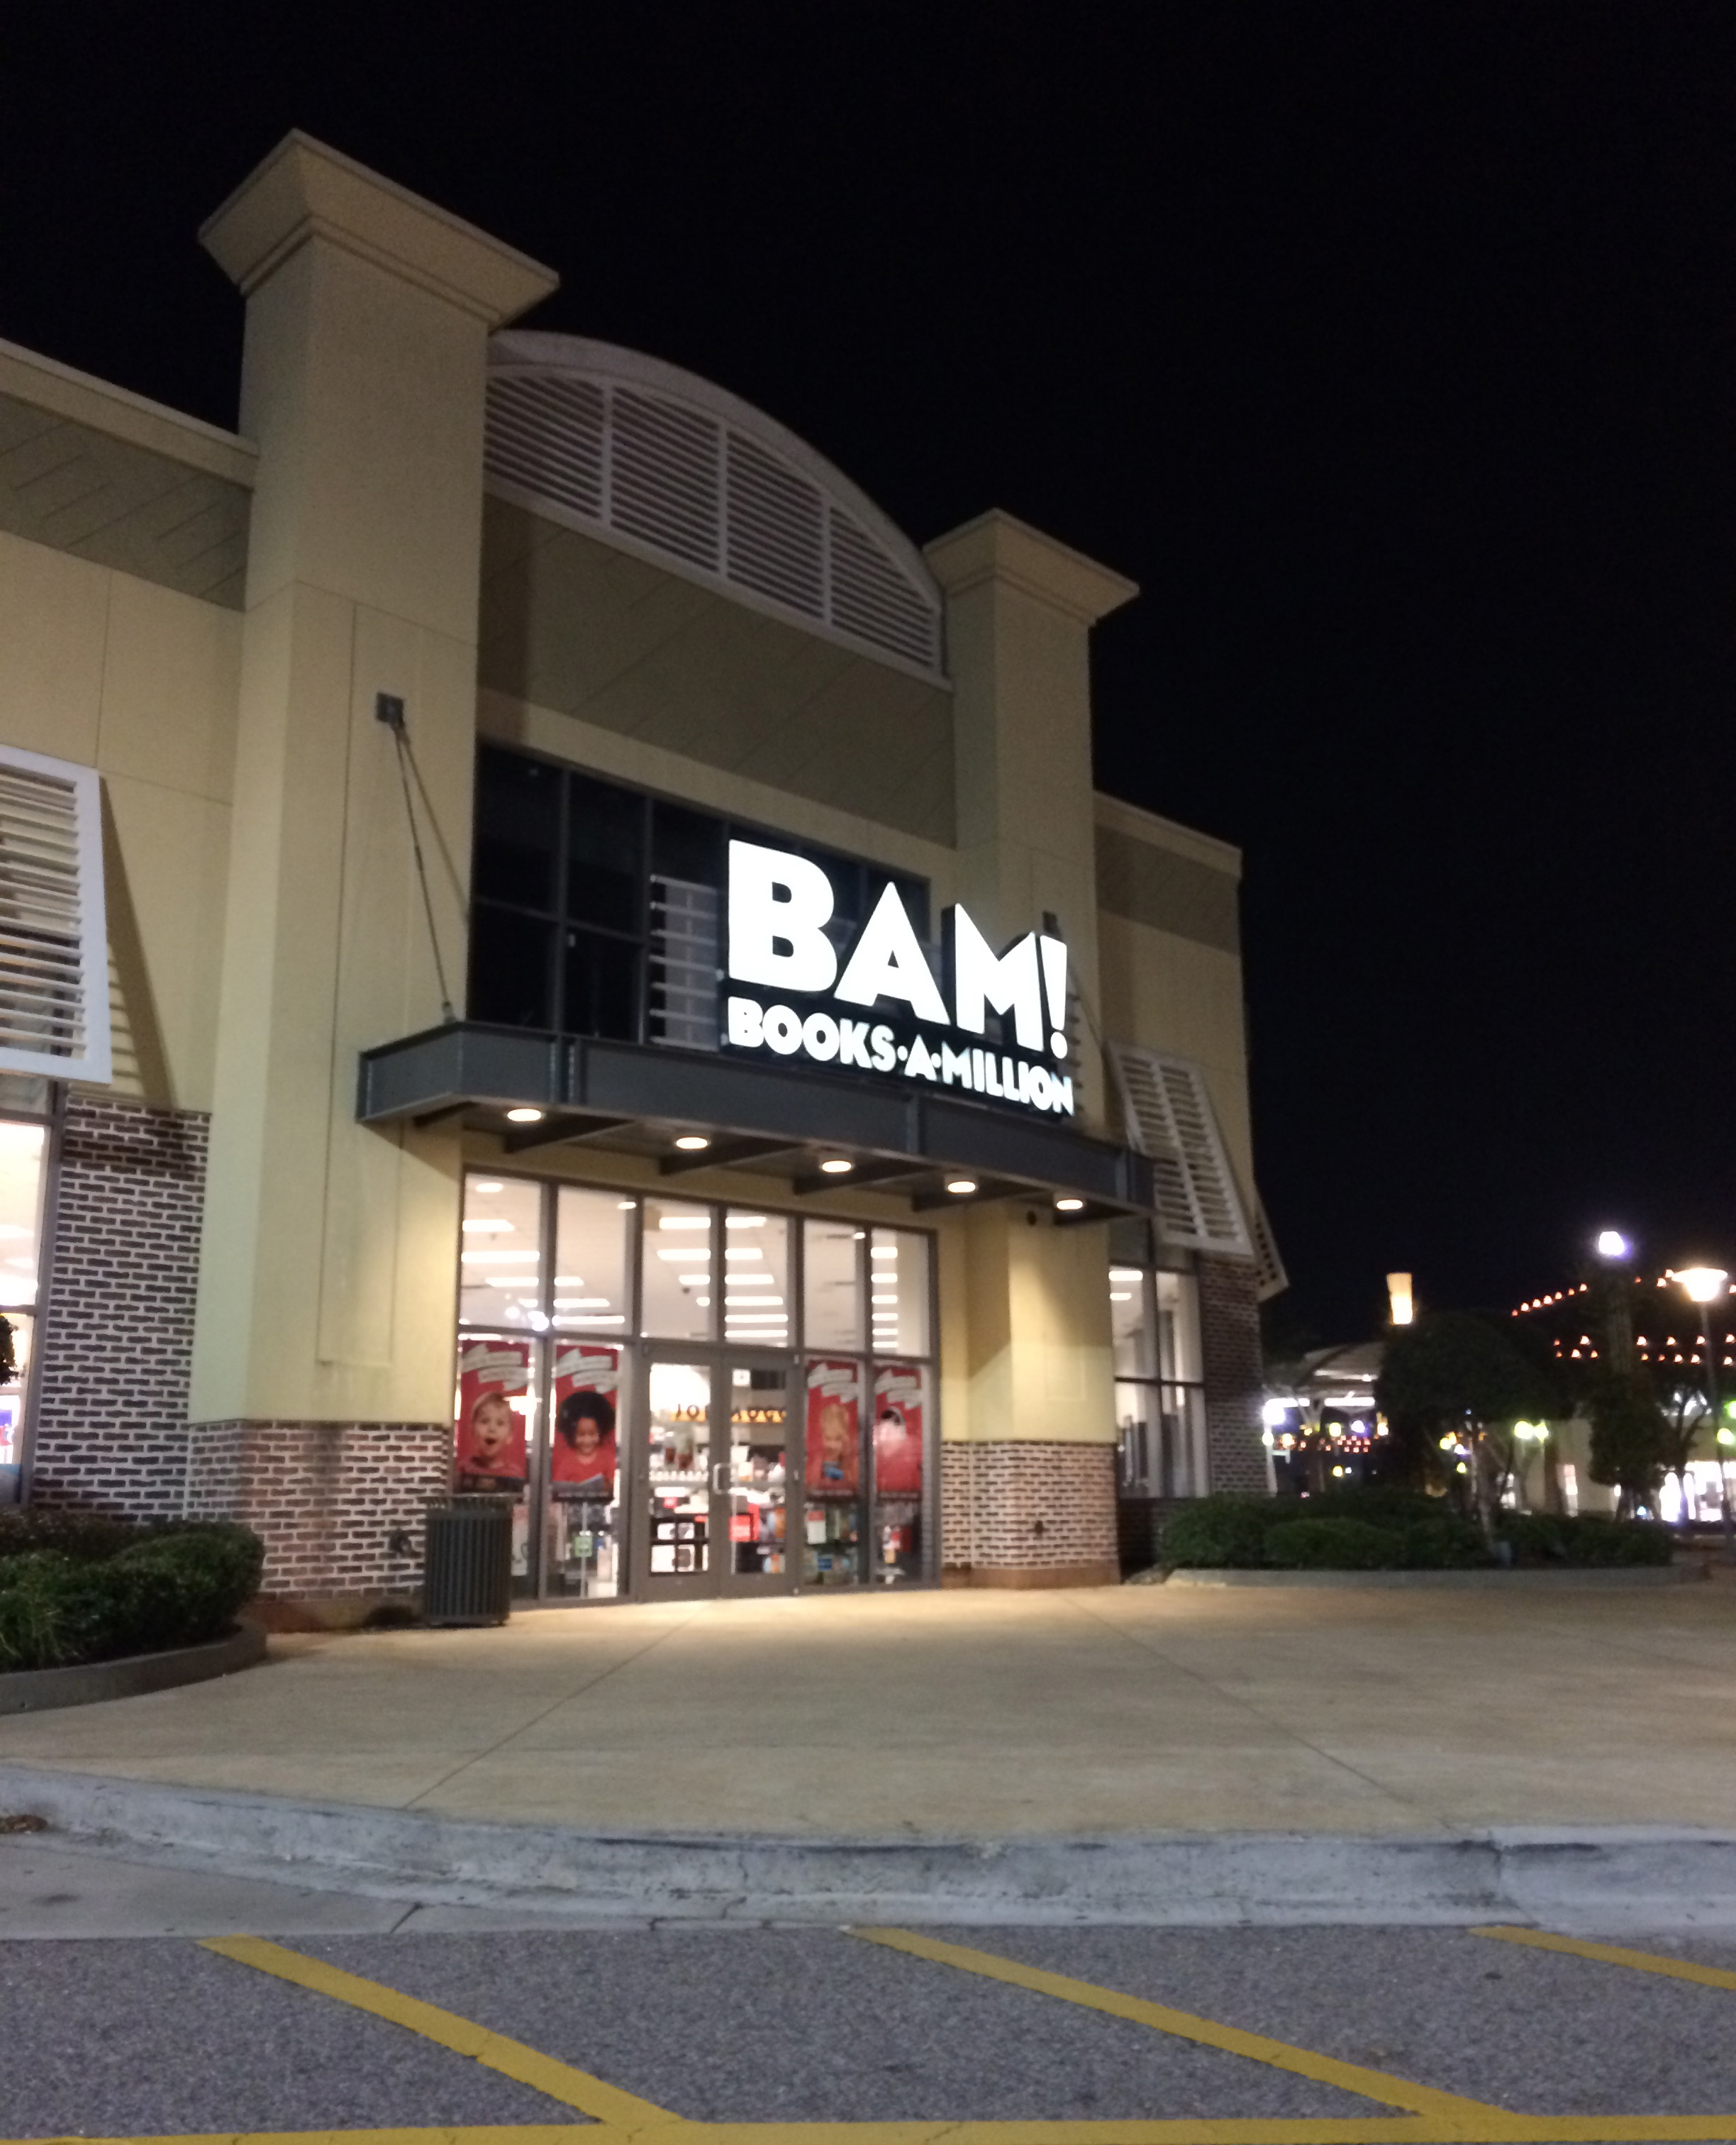 I went to Books-A-Million for the first time in my life tonight. This was the Myrtle Beach location that I went to.